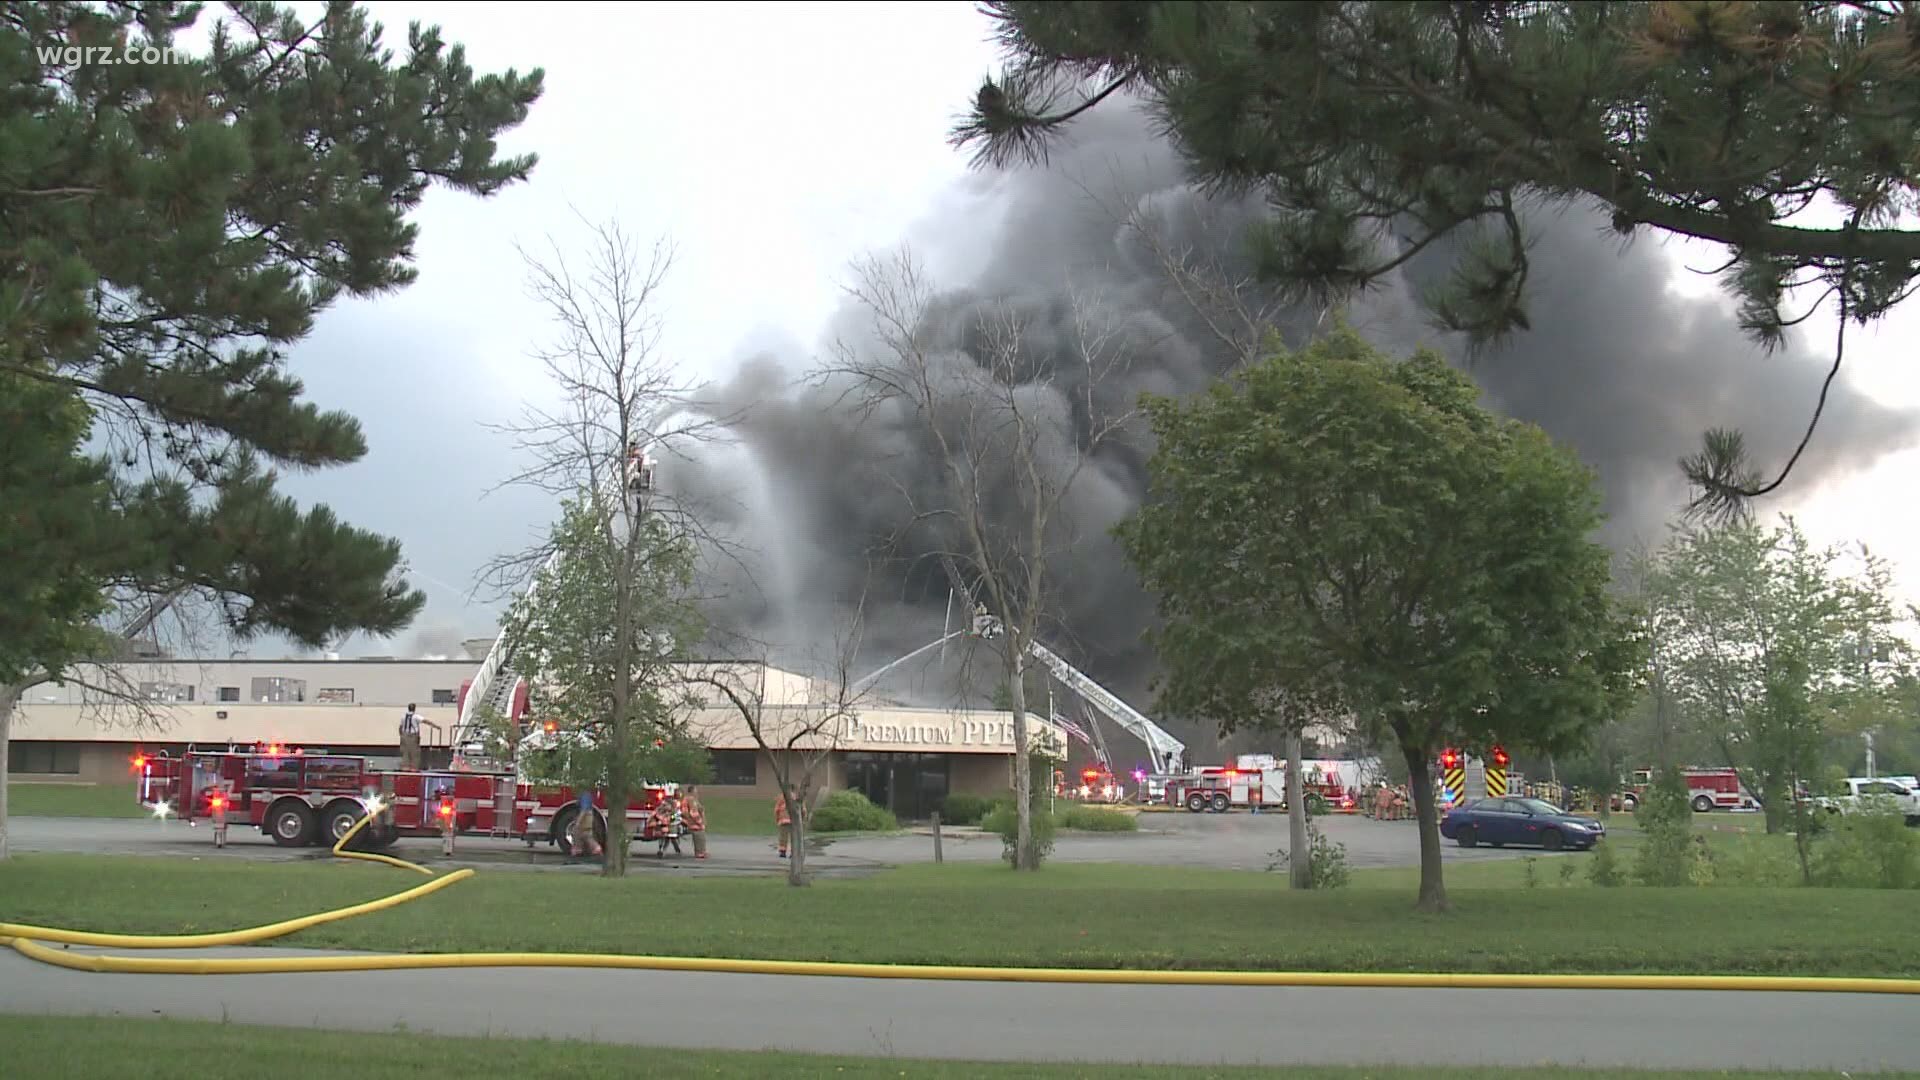 The warehouse blaze burned out of control for more than 8 hours.